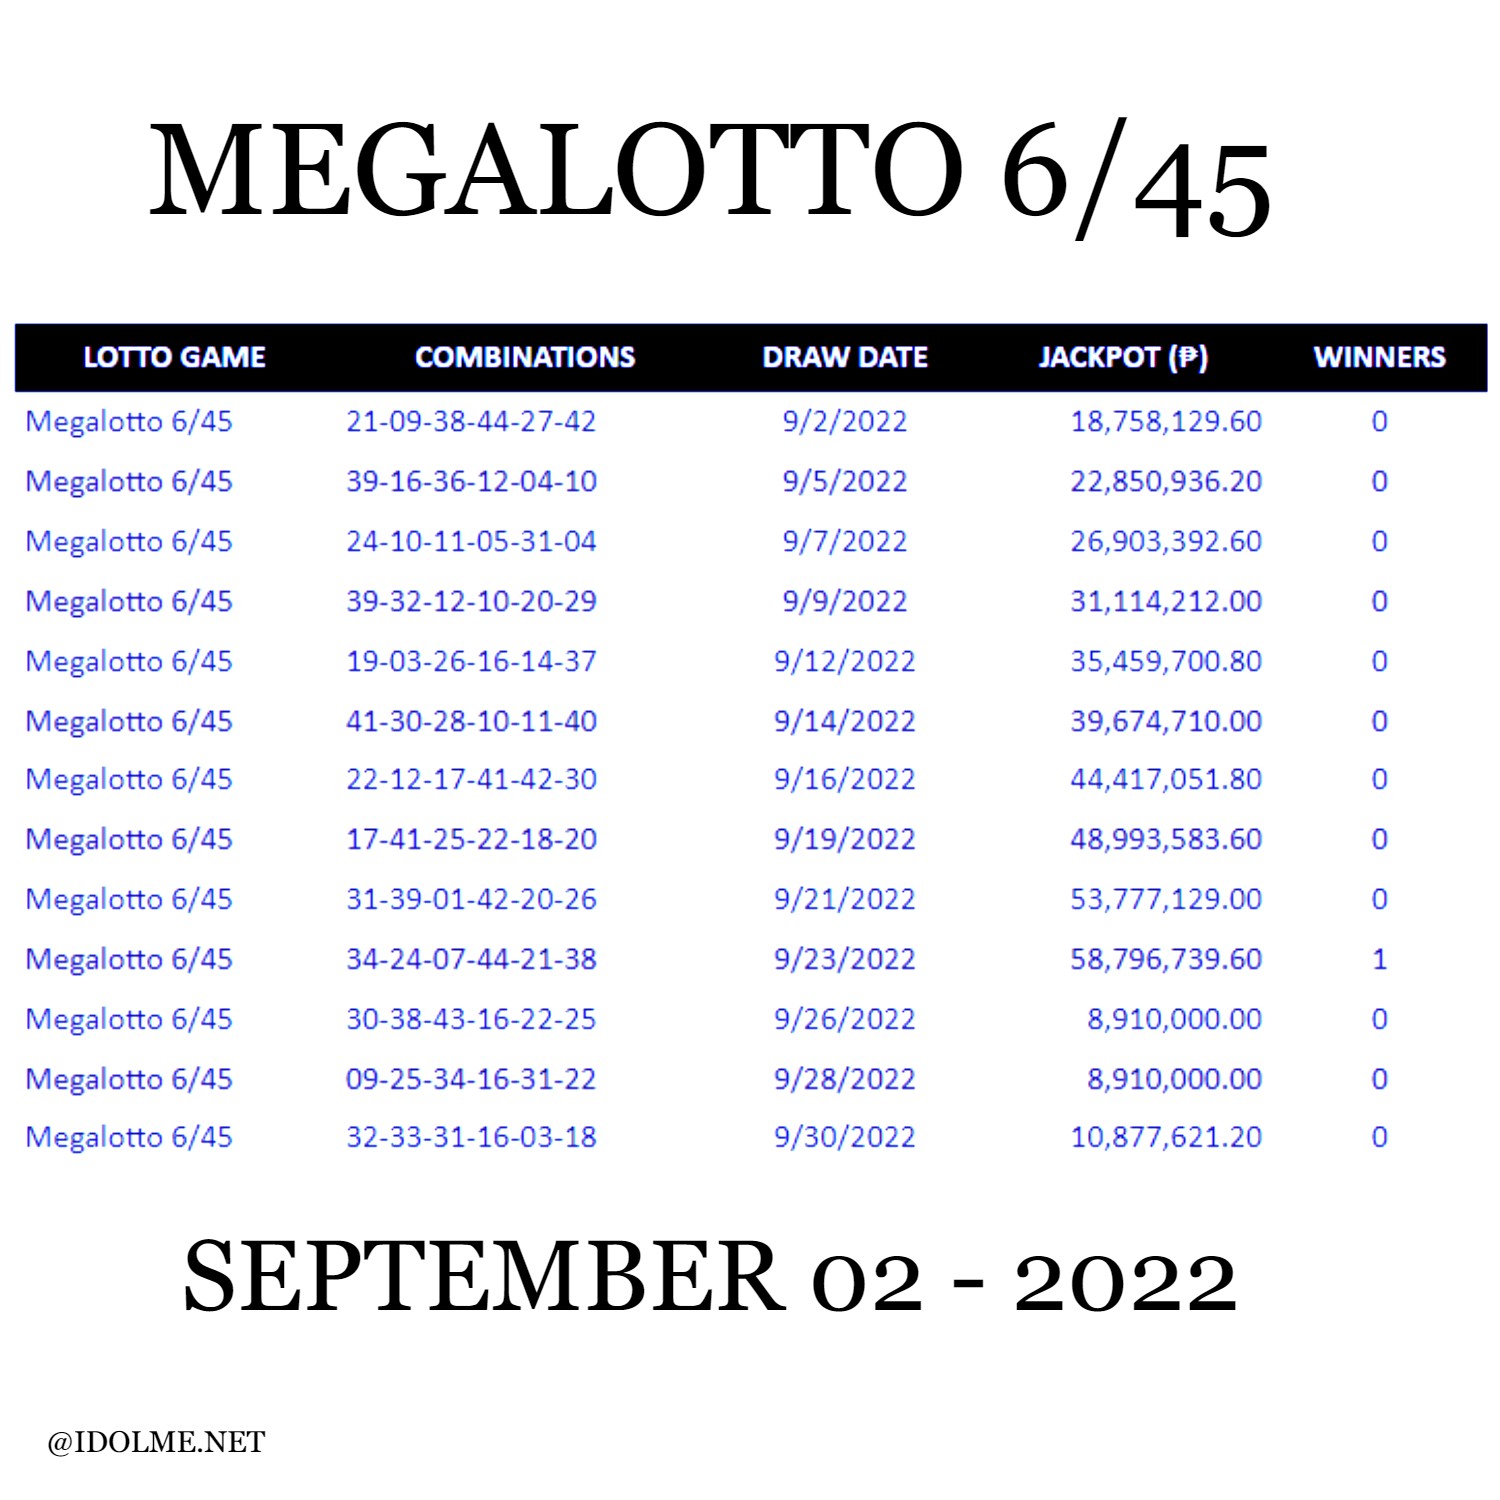 MEGALOTTO RESULTS SEPTEMBER 2022